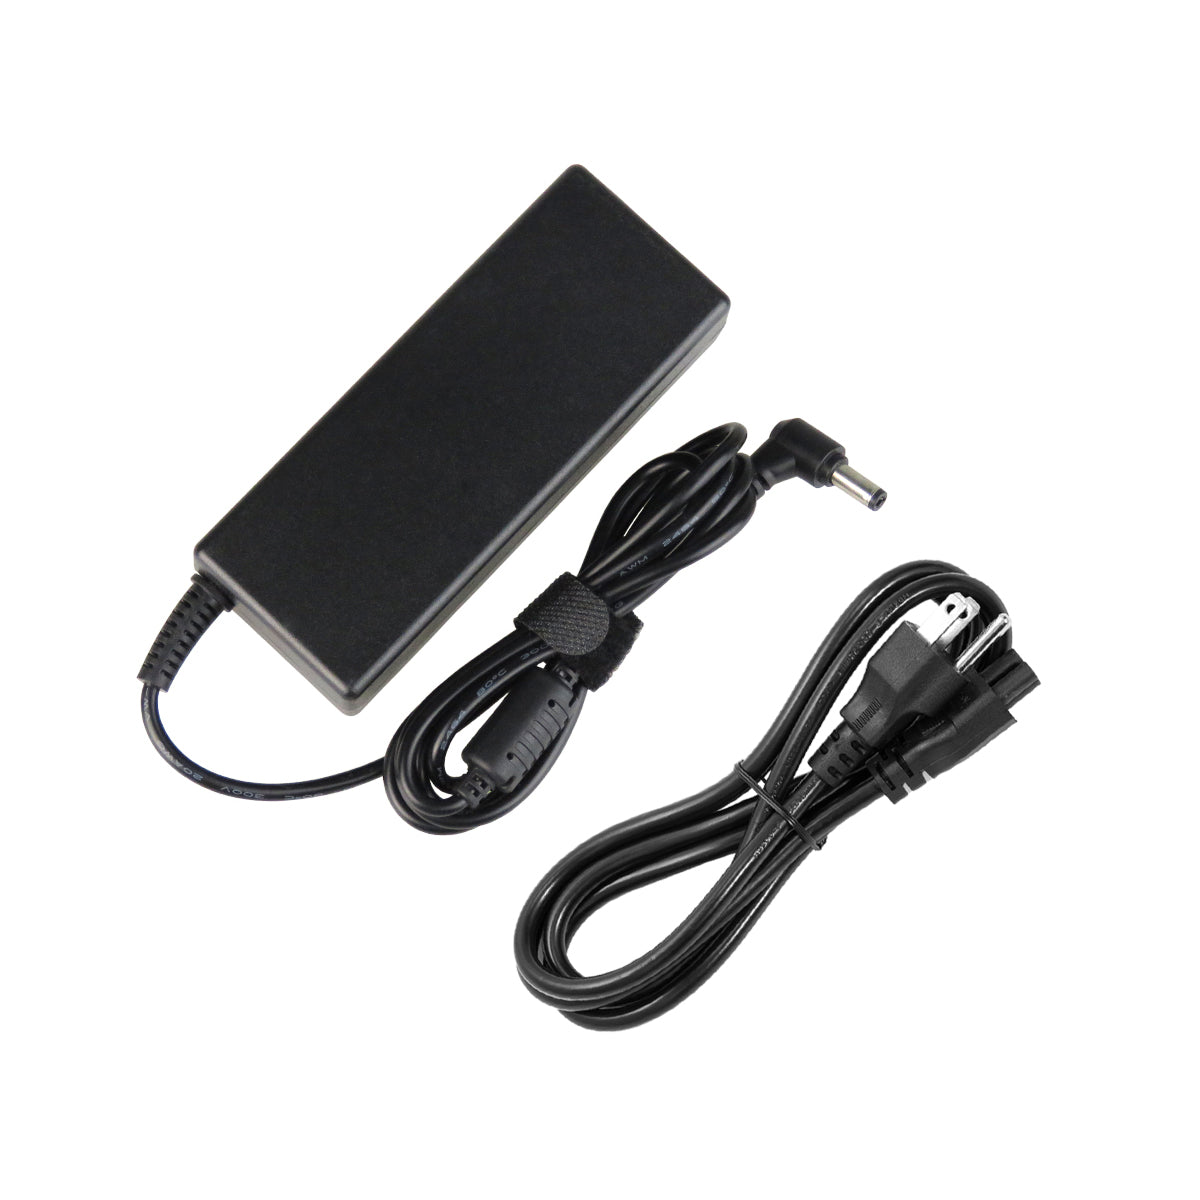 AC Adapter Charger for ASUS K43TA Notebook.